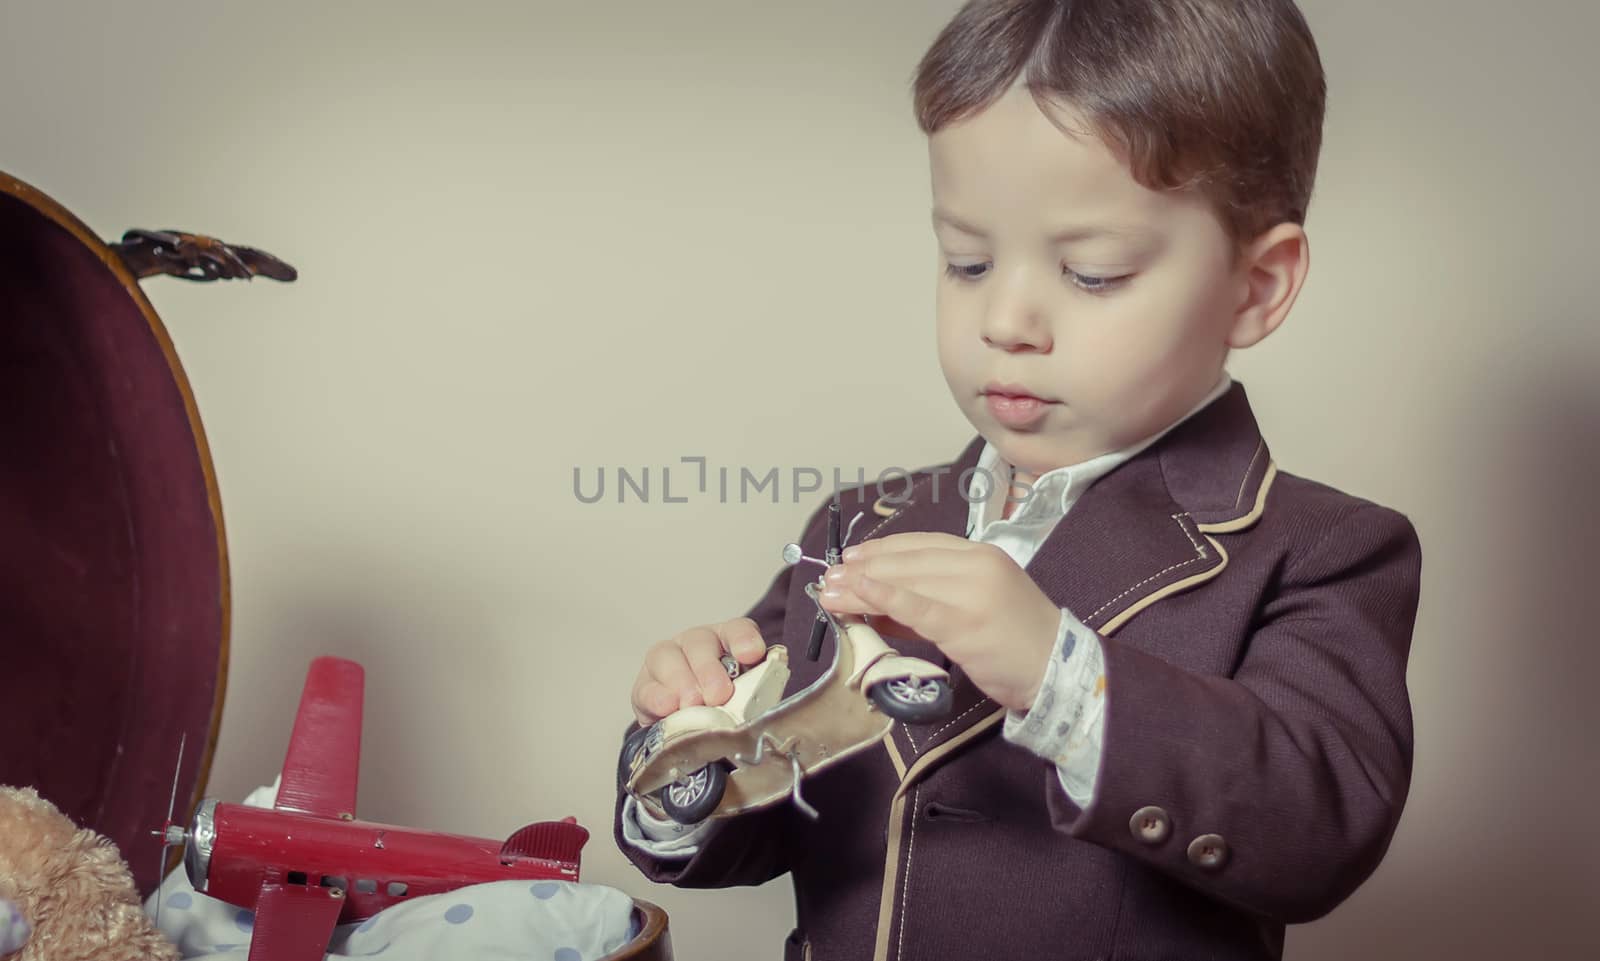 Vintage portrait of cute little boy playing with antique tin toys found in a old case. Retro style concept.